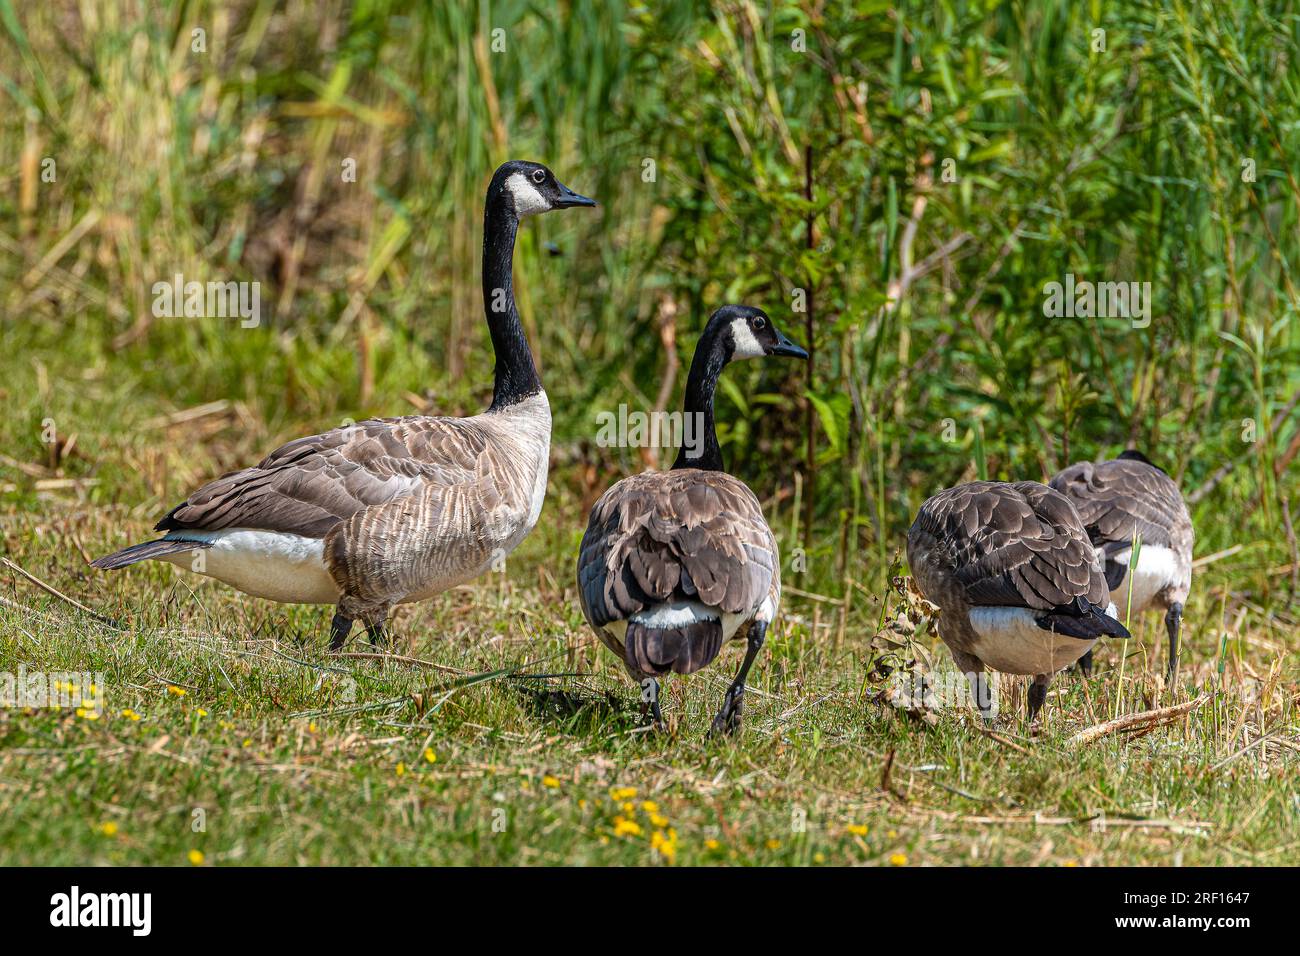 Canadian Goose (Branta canadensis), these geese can be found throughout Canada with a black head and neck, white cheeks, white chin, and brown body. Stock Photo